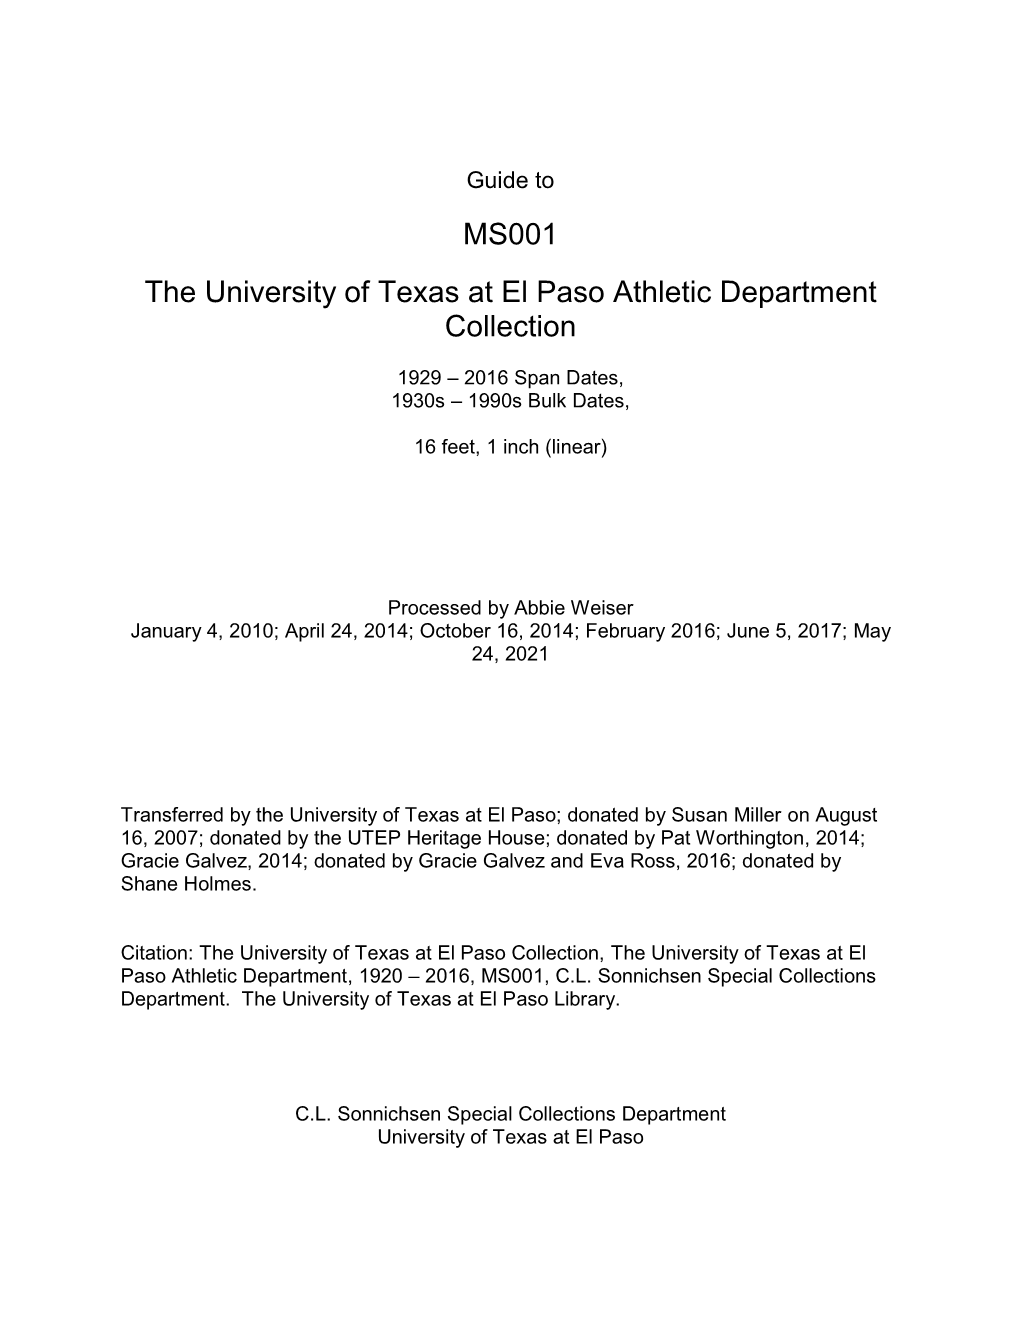 MS001 the University of Texas at El Paso Athletic Department Collection